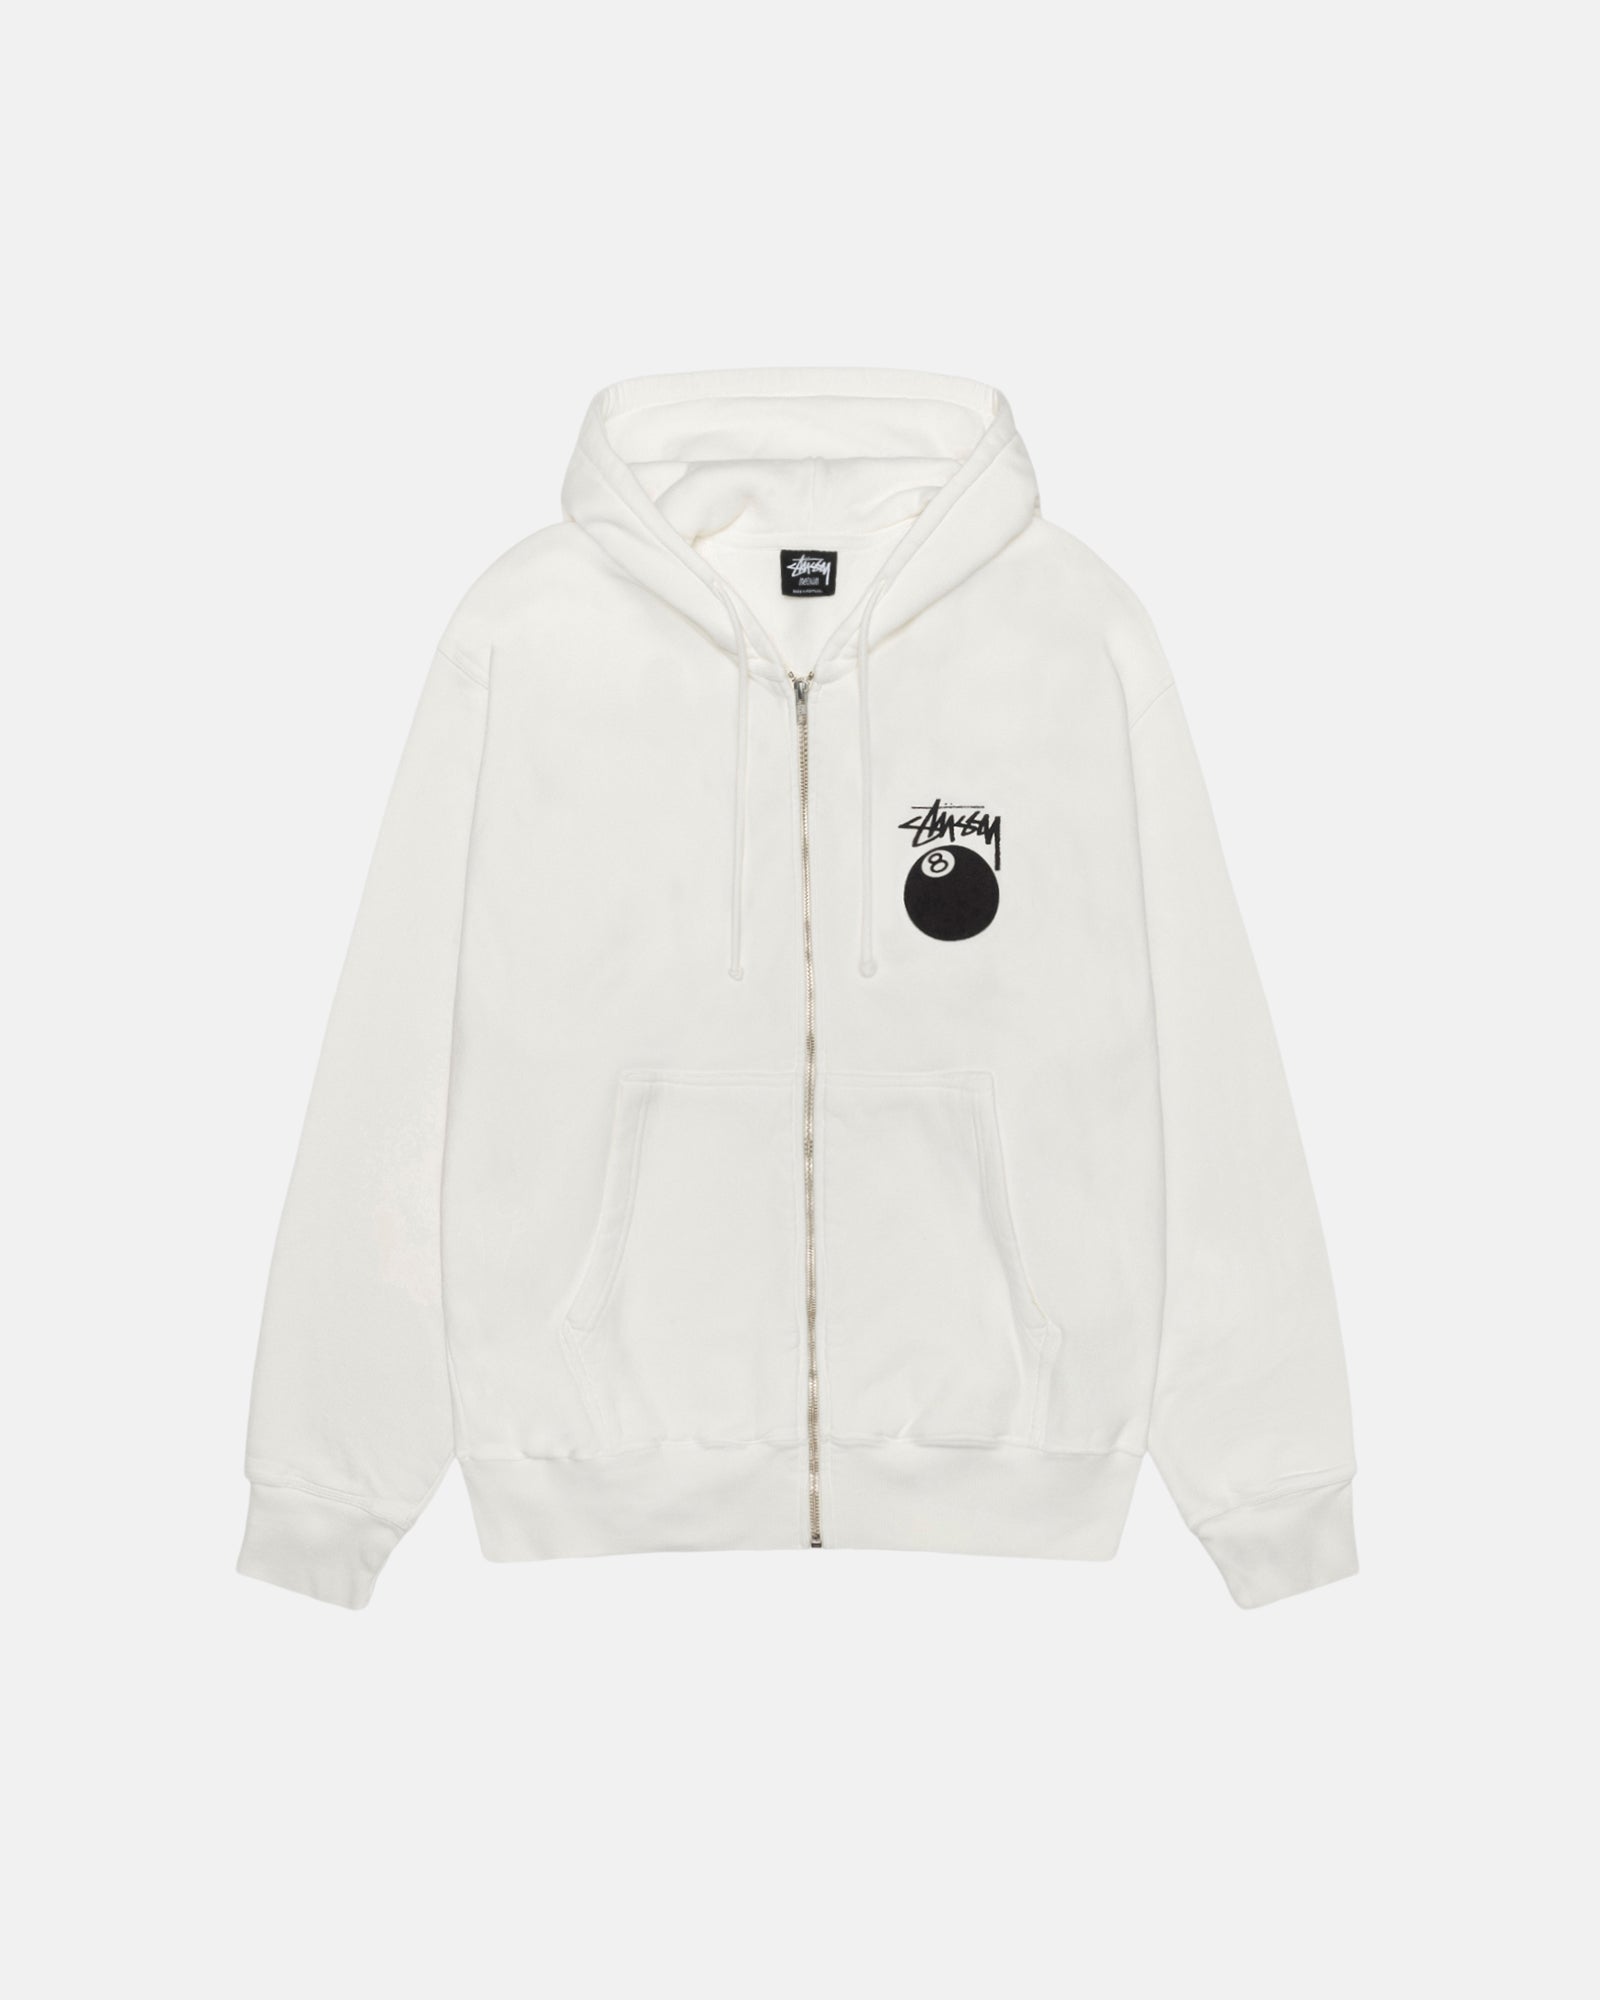 Stüssy 8 Ball Zip Hoodie Pigment Dyed Natural Sweats